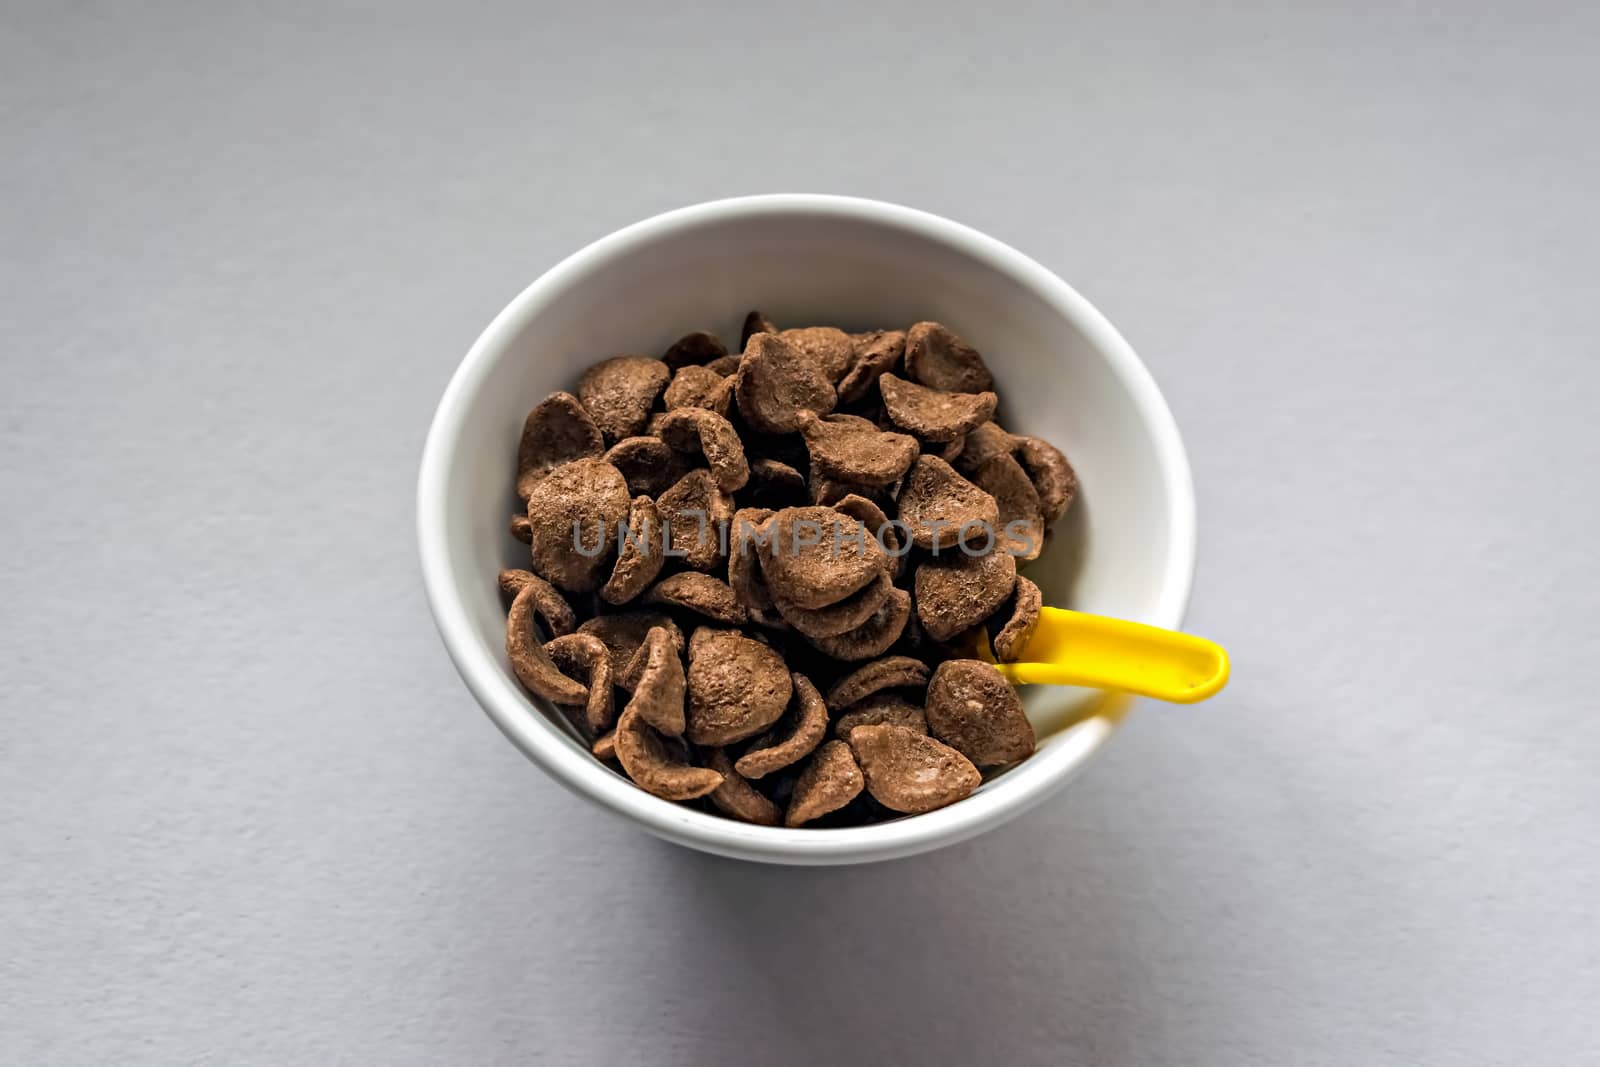 Wheat & chocolate based cereal flakes in a white bowl with yello by lalam